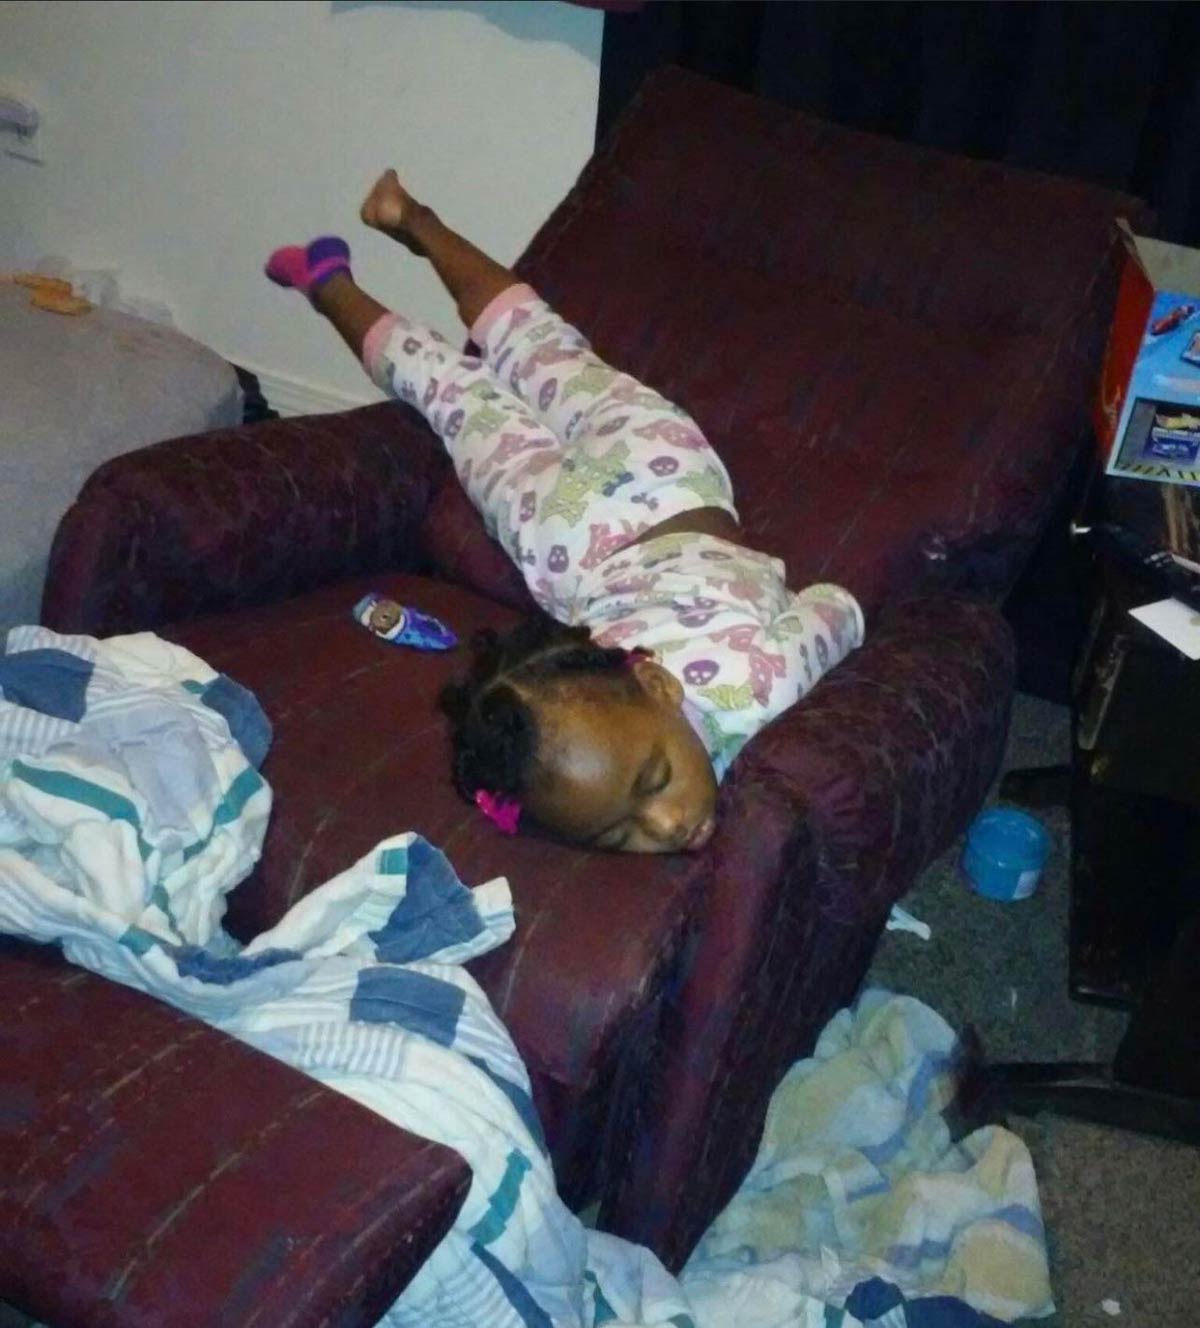 Old photo of my daughter. I got home from work one night to find her like this. I miss being a kid.. My back hurts looking at this